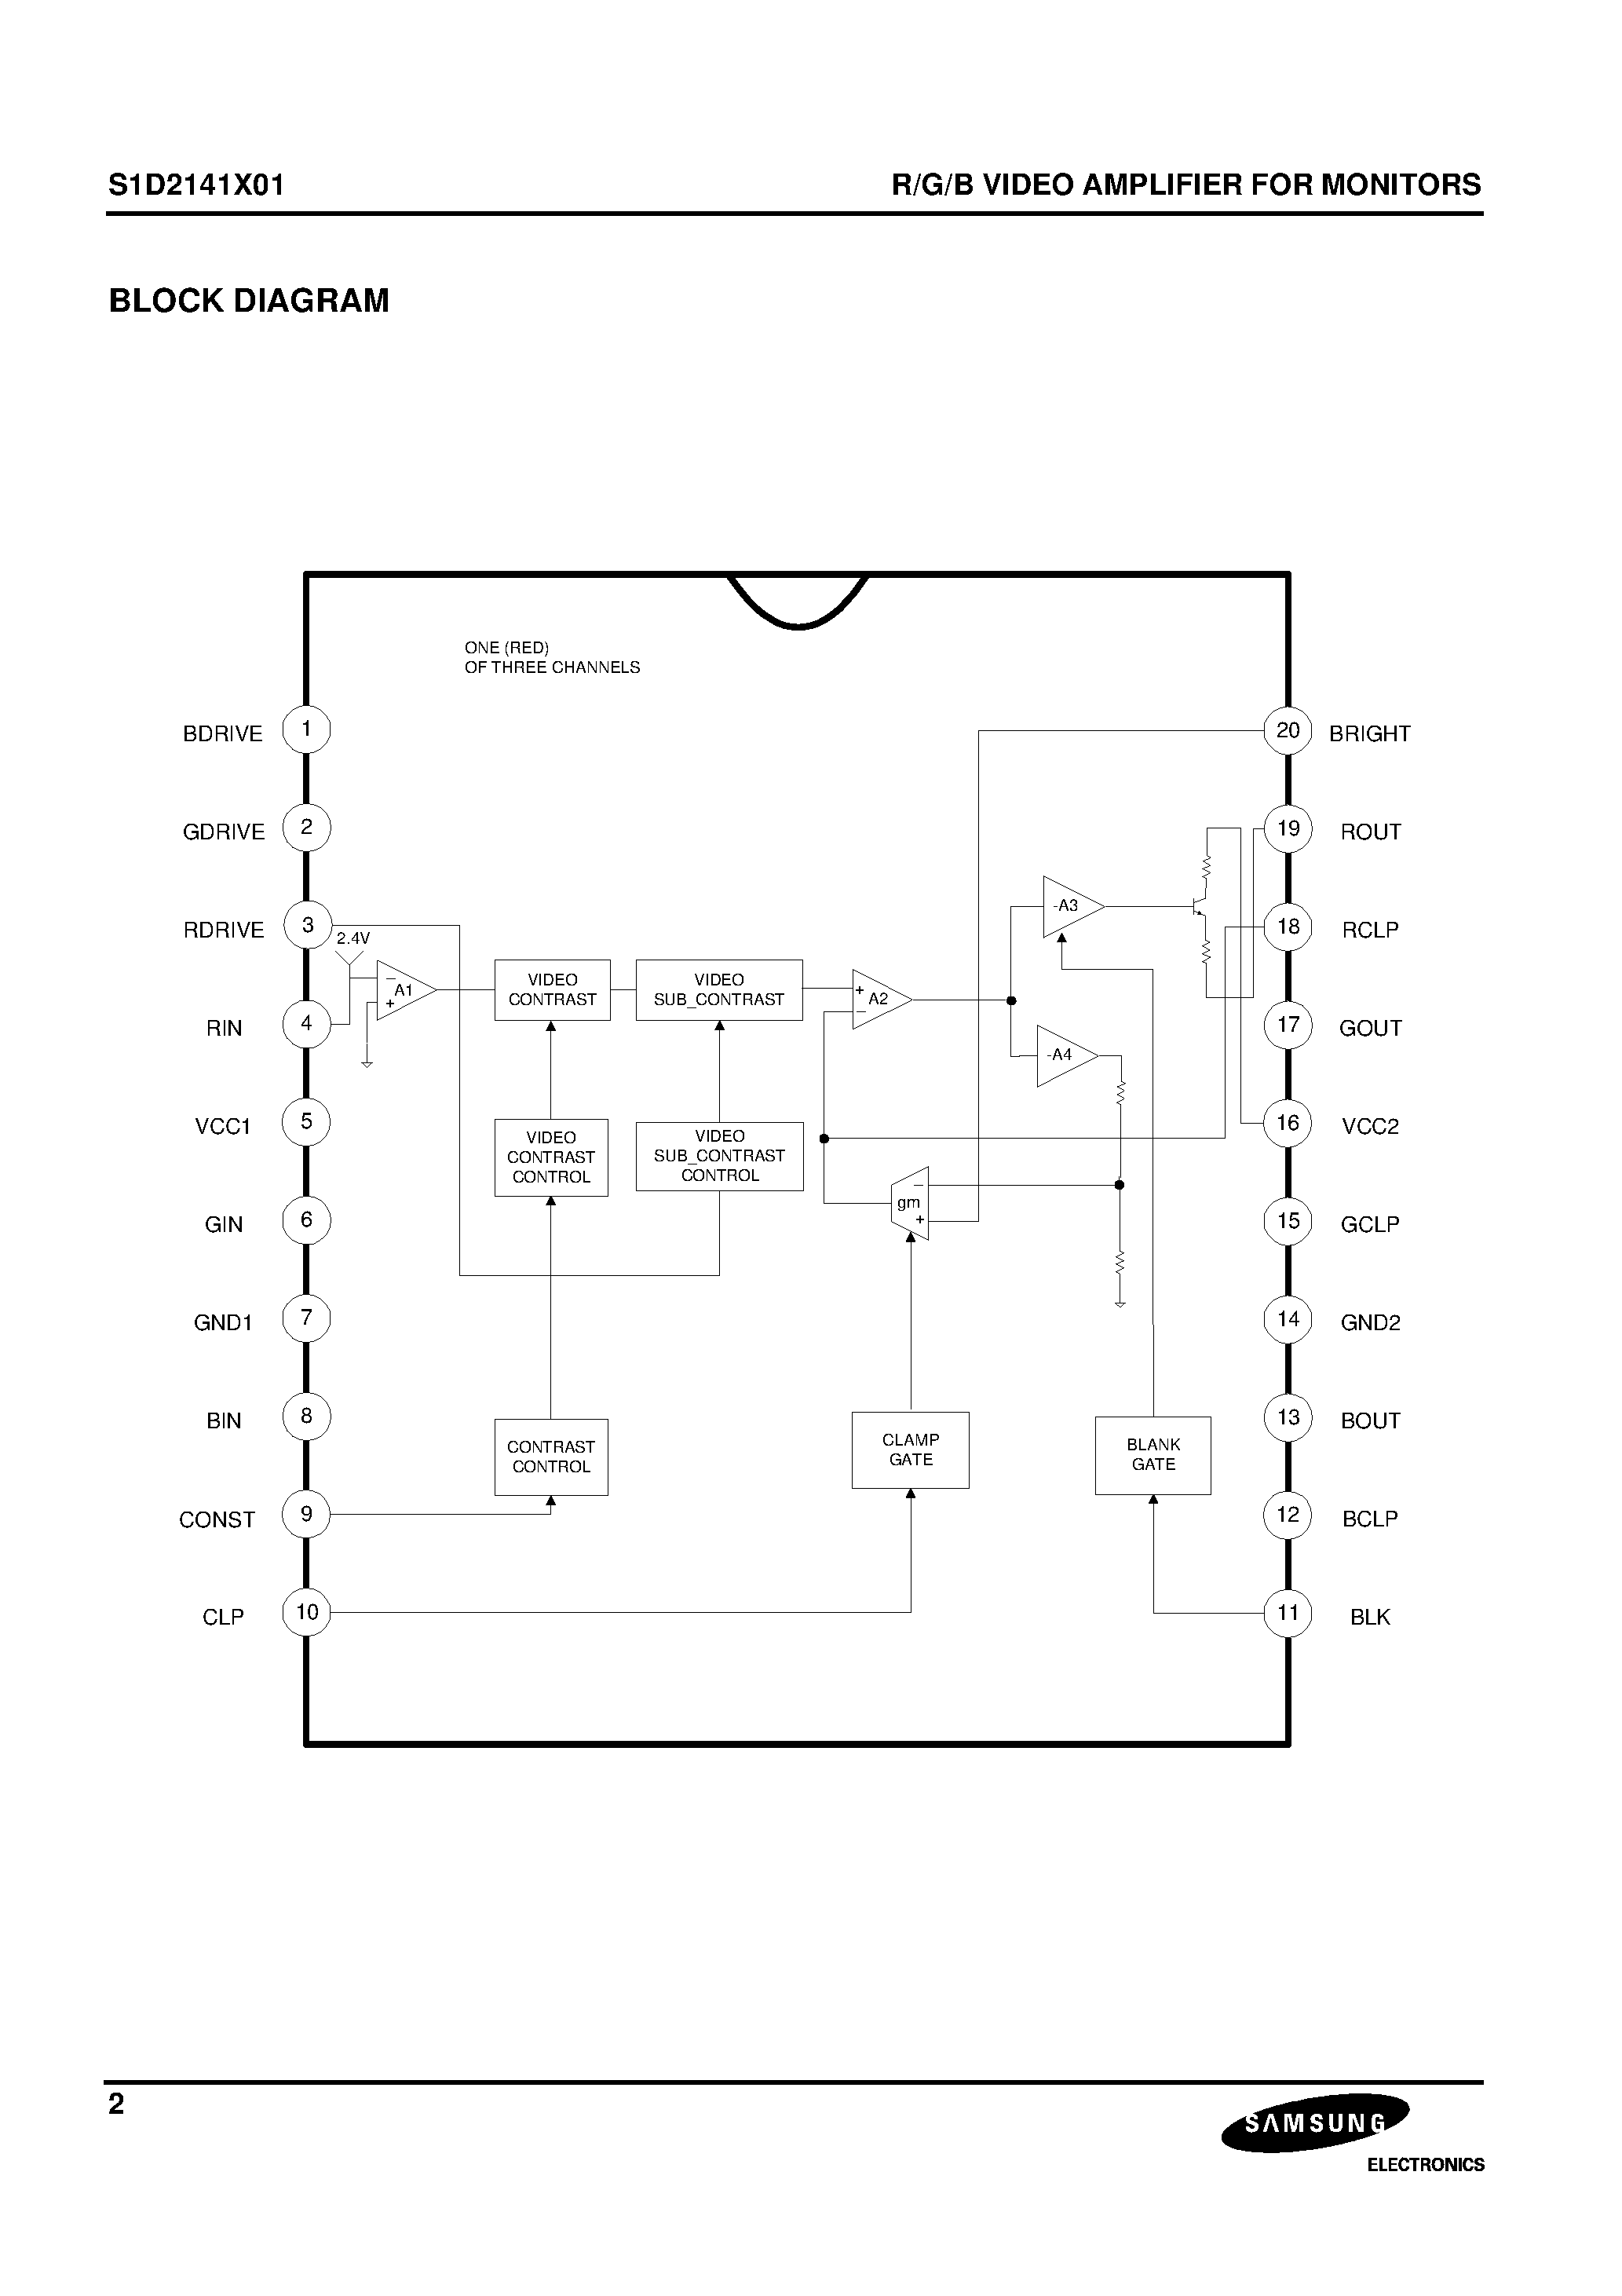 Datasheet S1D2141X01-D0 - R/G/B VIDEO AMPLIFIER FOR MONITORS page 2